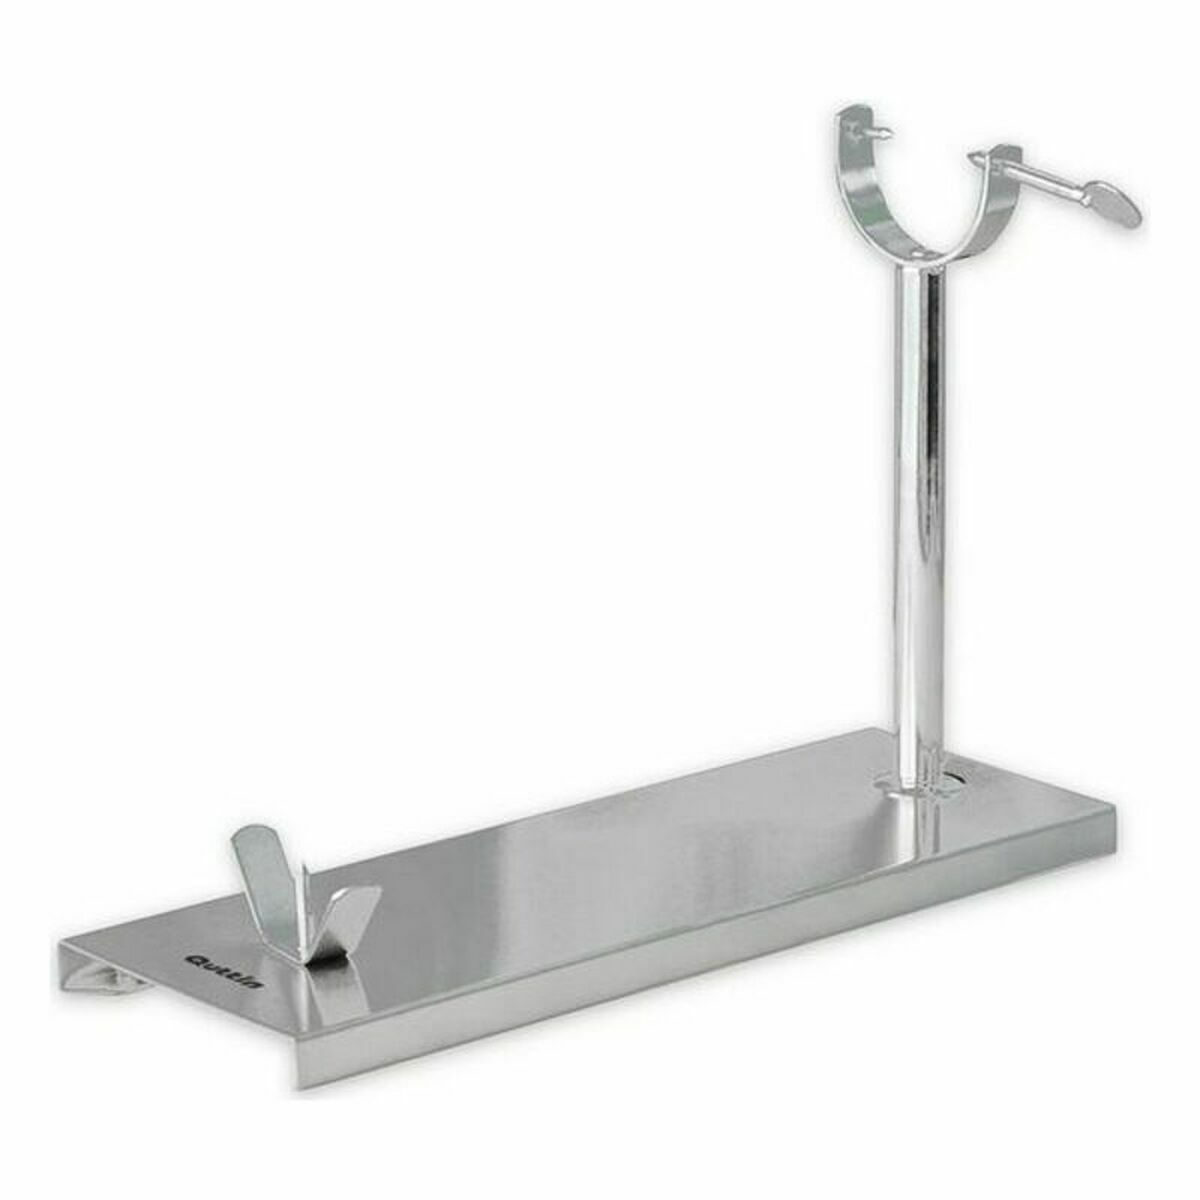 Stainless Steel Ham Stand (support for whole leg of ham) Quttin 108689 (49 x 16 x 3 cm) (4 Units)